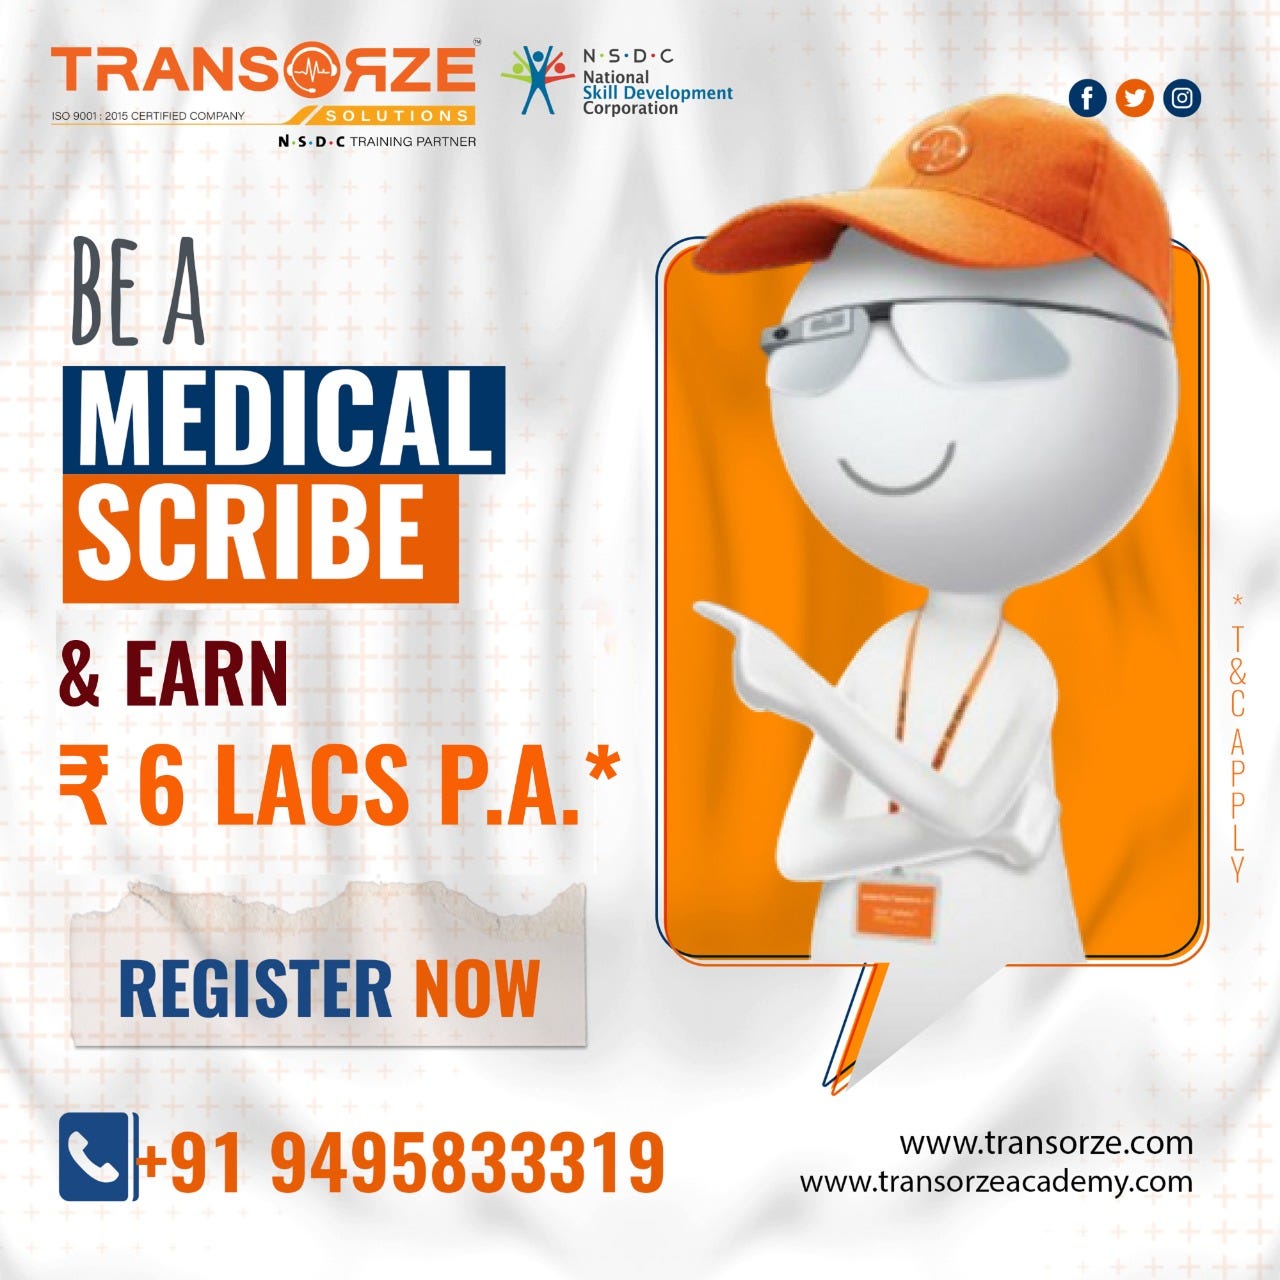 Medical Scribe Companies - Medical Scribes Training Institute